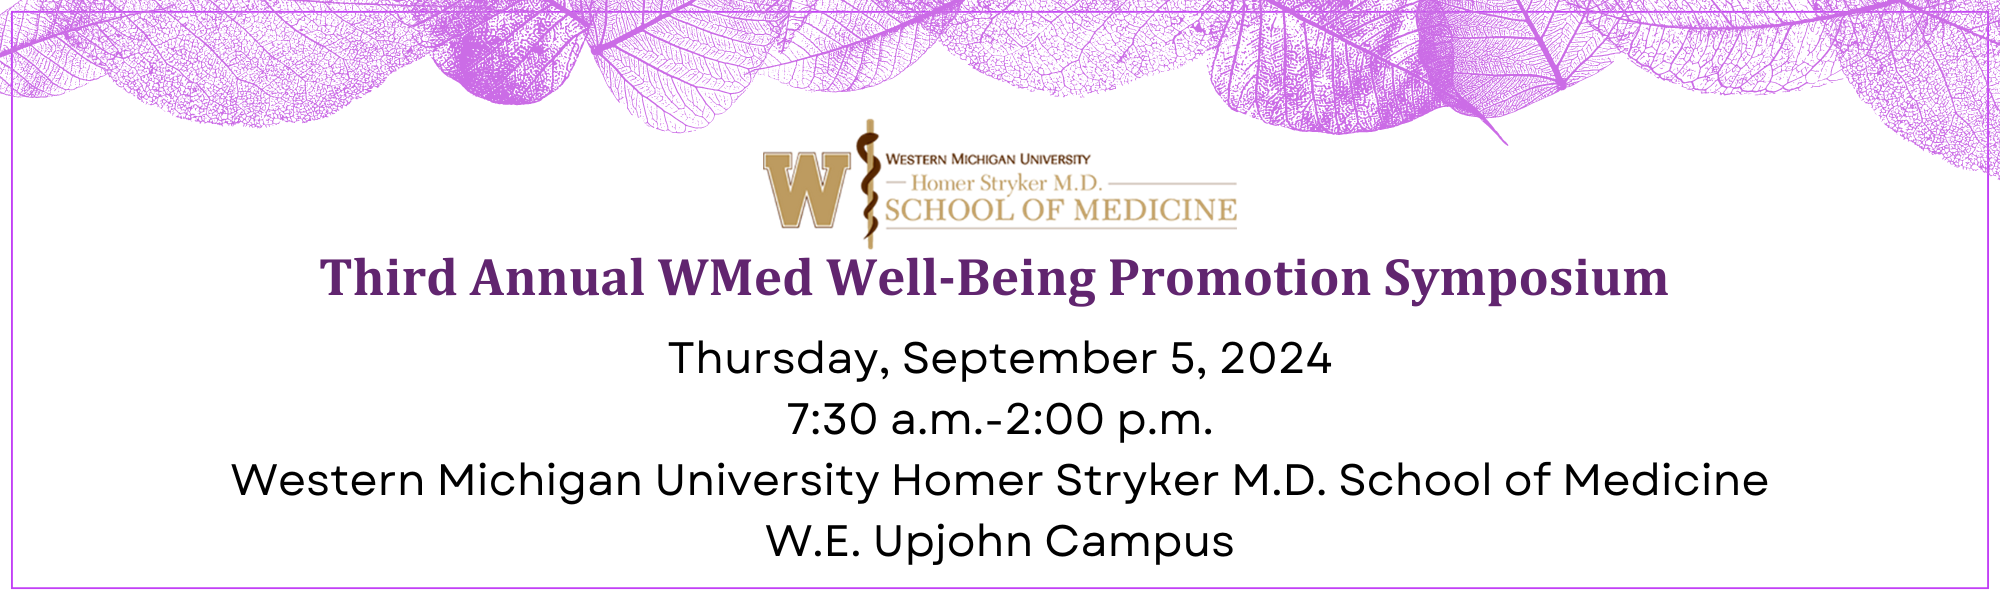 3rd Annual WMed Well-Being Promotion Symposium Banner